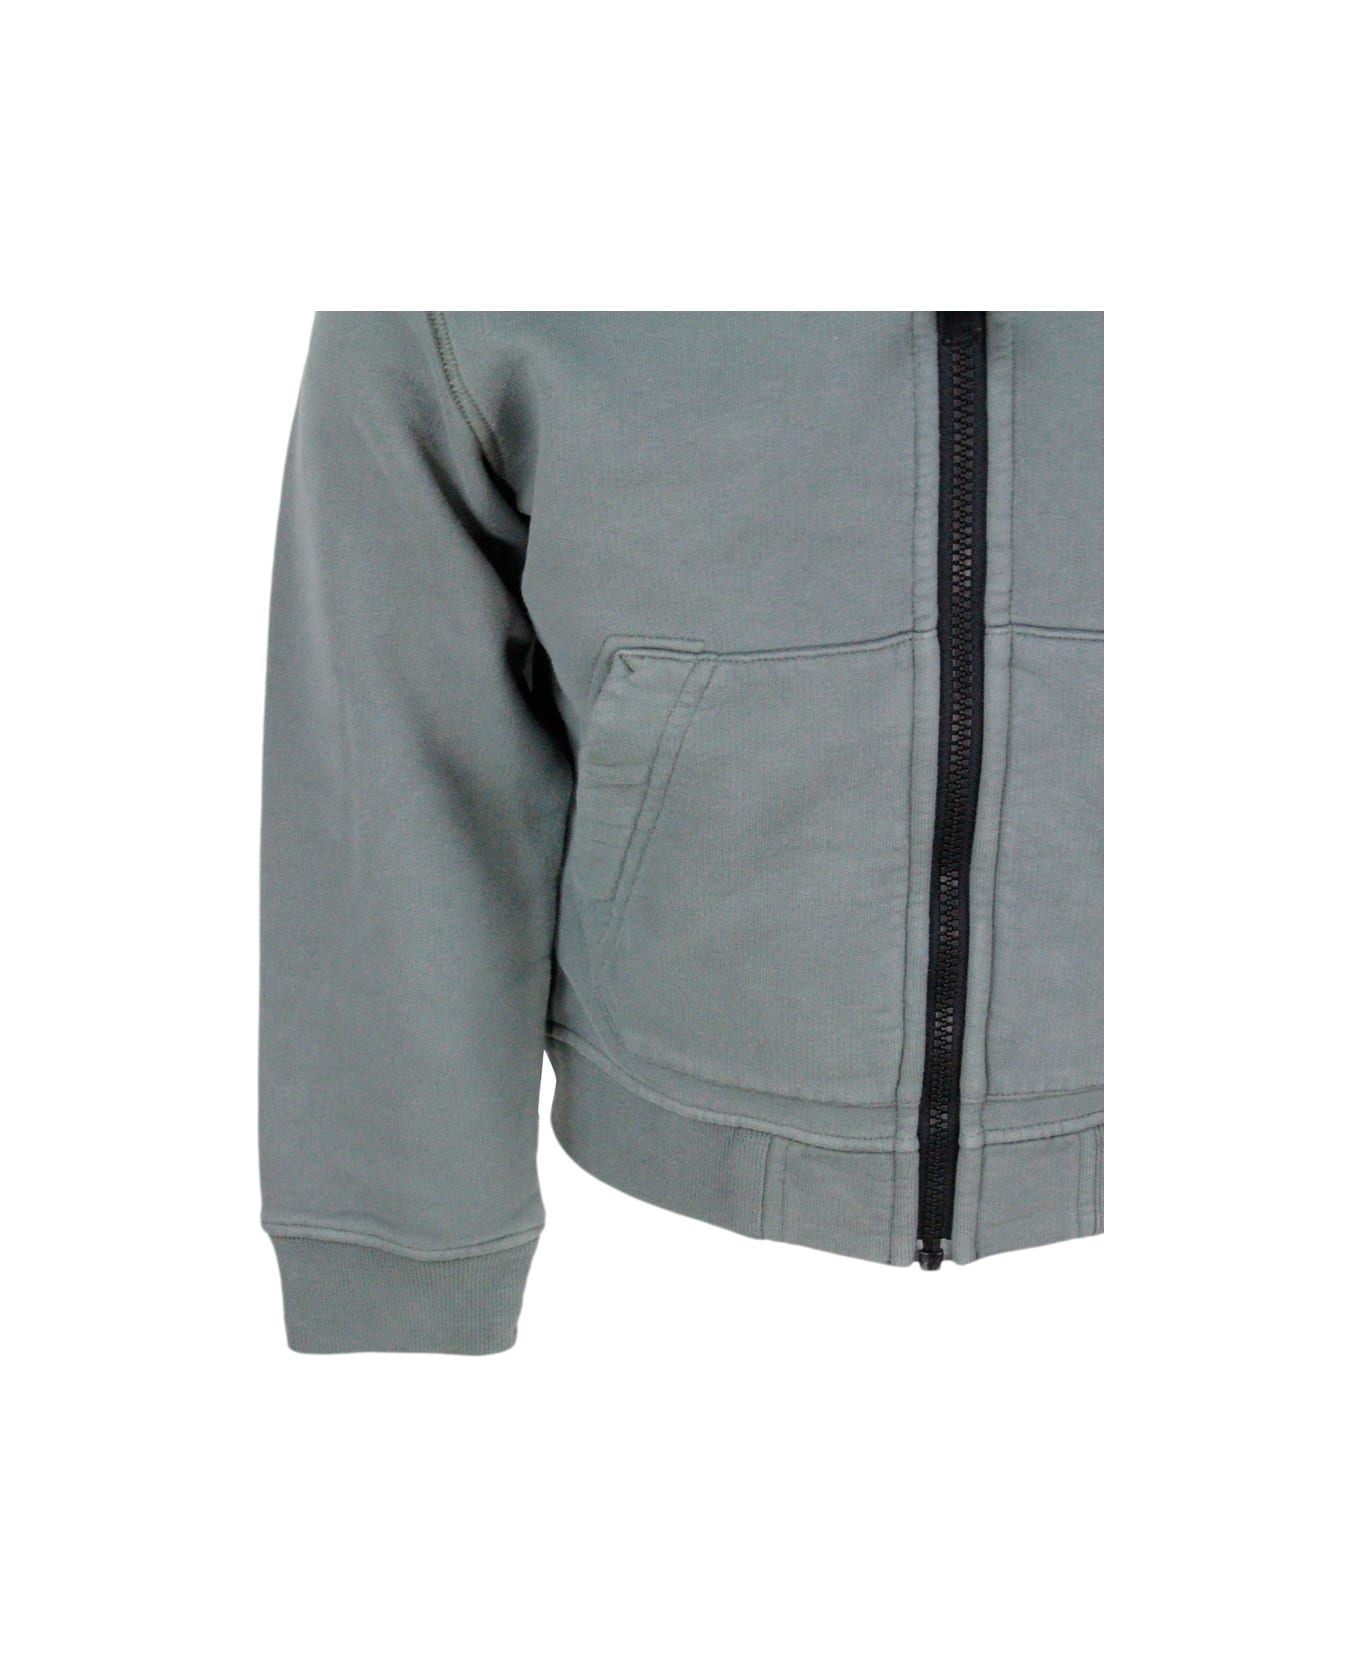 Stone Island Full Zip Hoodie With Long Sleeves In Stretch Cotton With Badge On The Left Sleeve - Grey ニットウェア＆スウェットシャツ